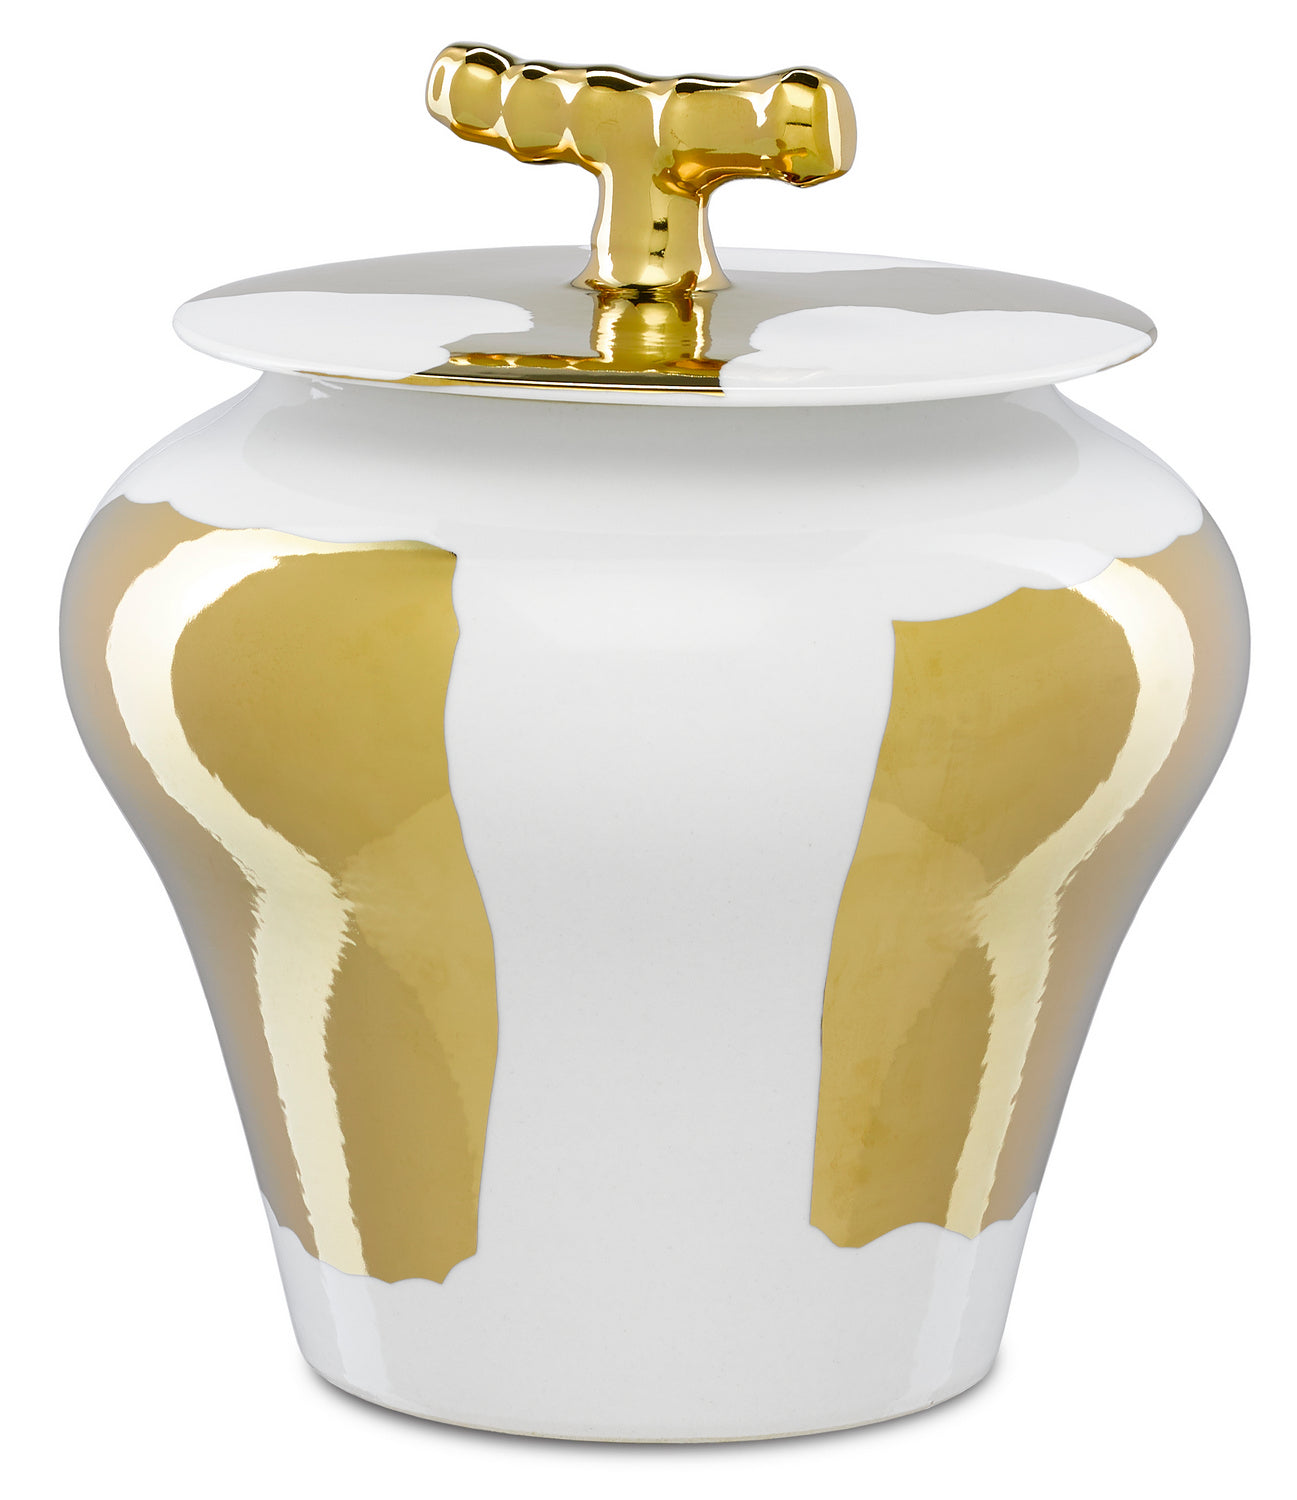 Jar from the Brill collection in White/Gold finish